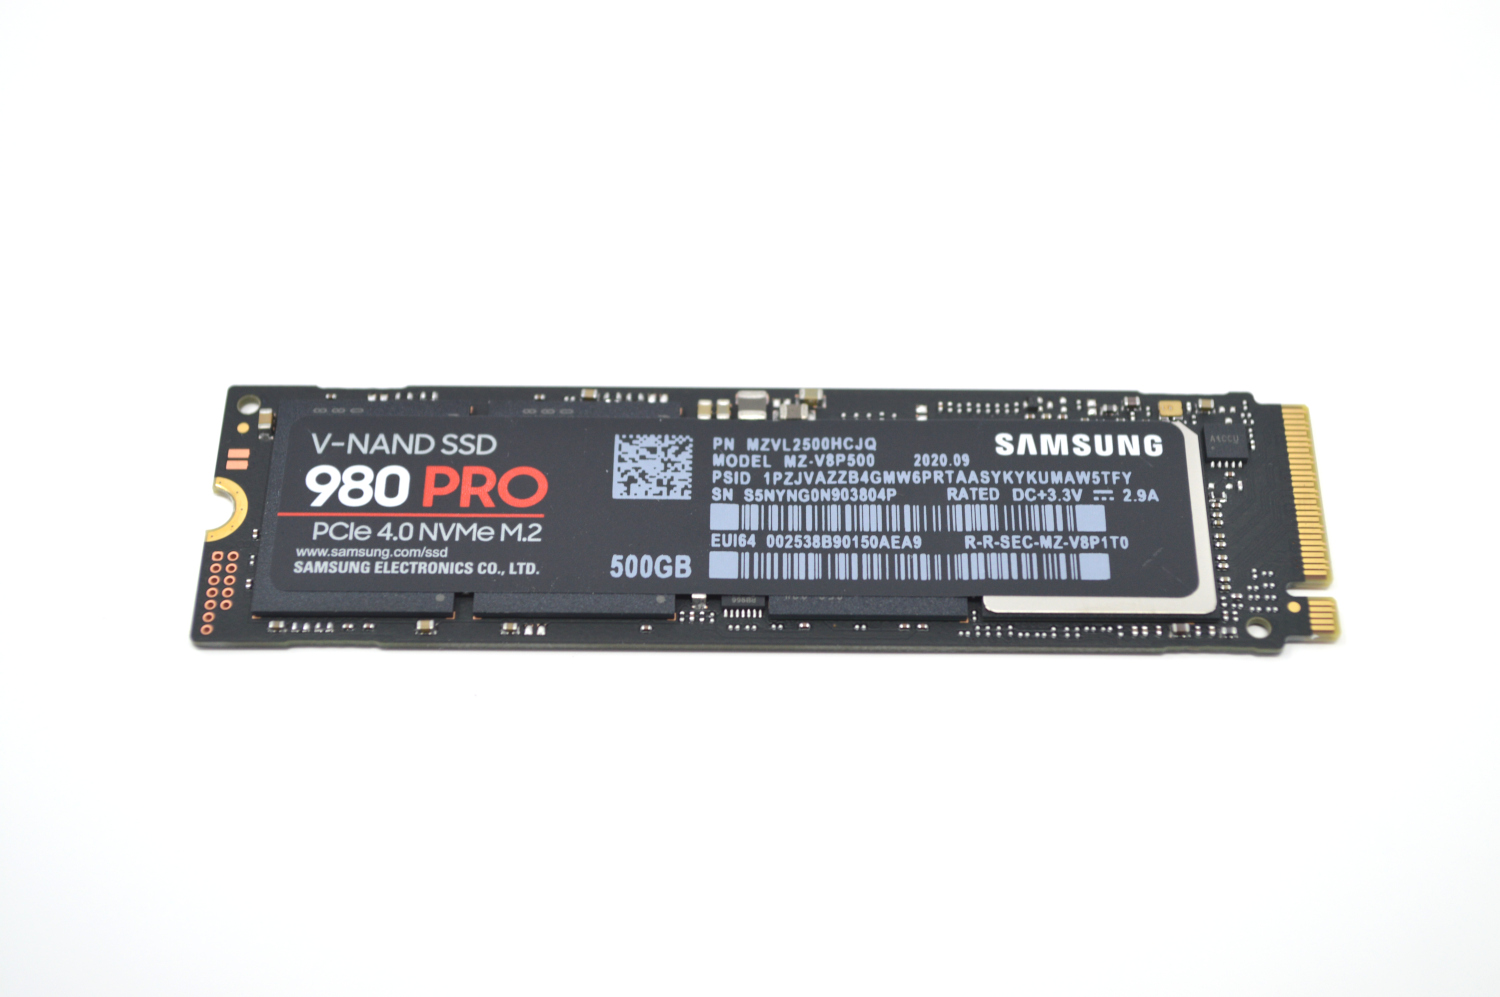 Review - Samsung 980 PRO PCIe 4.0 NVMe SSD 250GB - Great example of why  premium SSDs have their own market